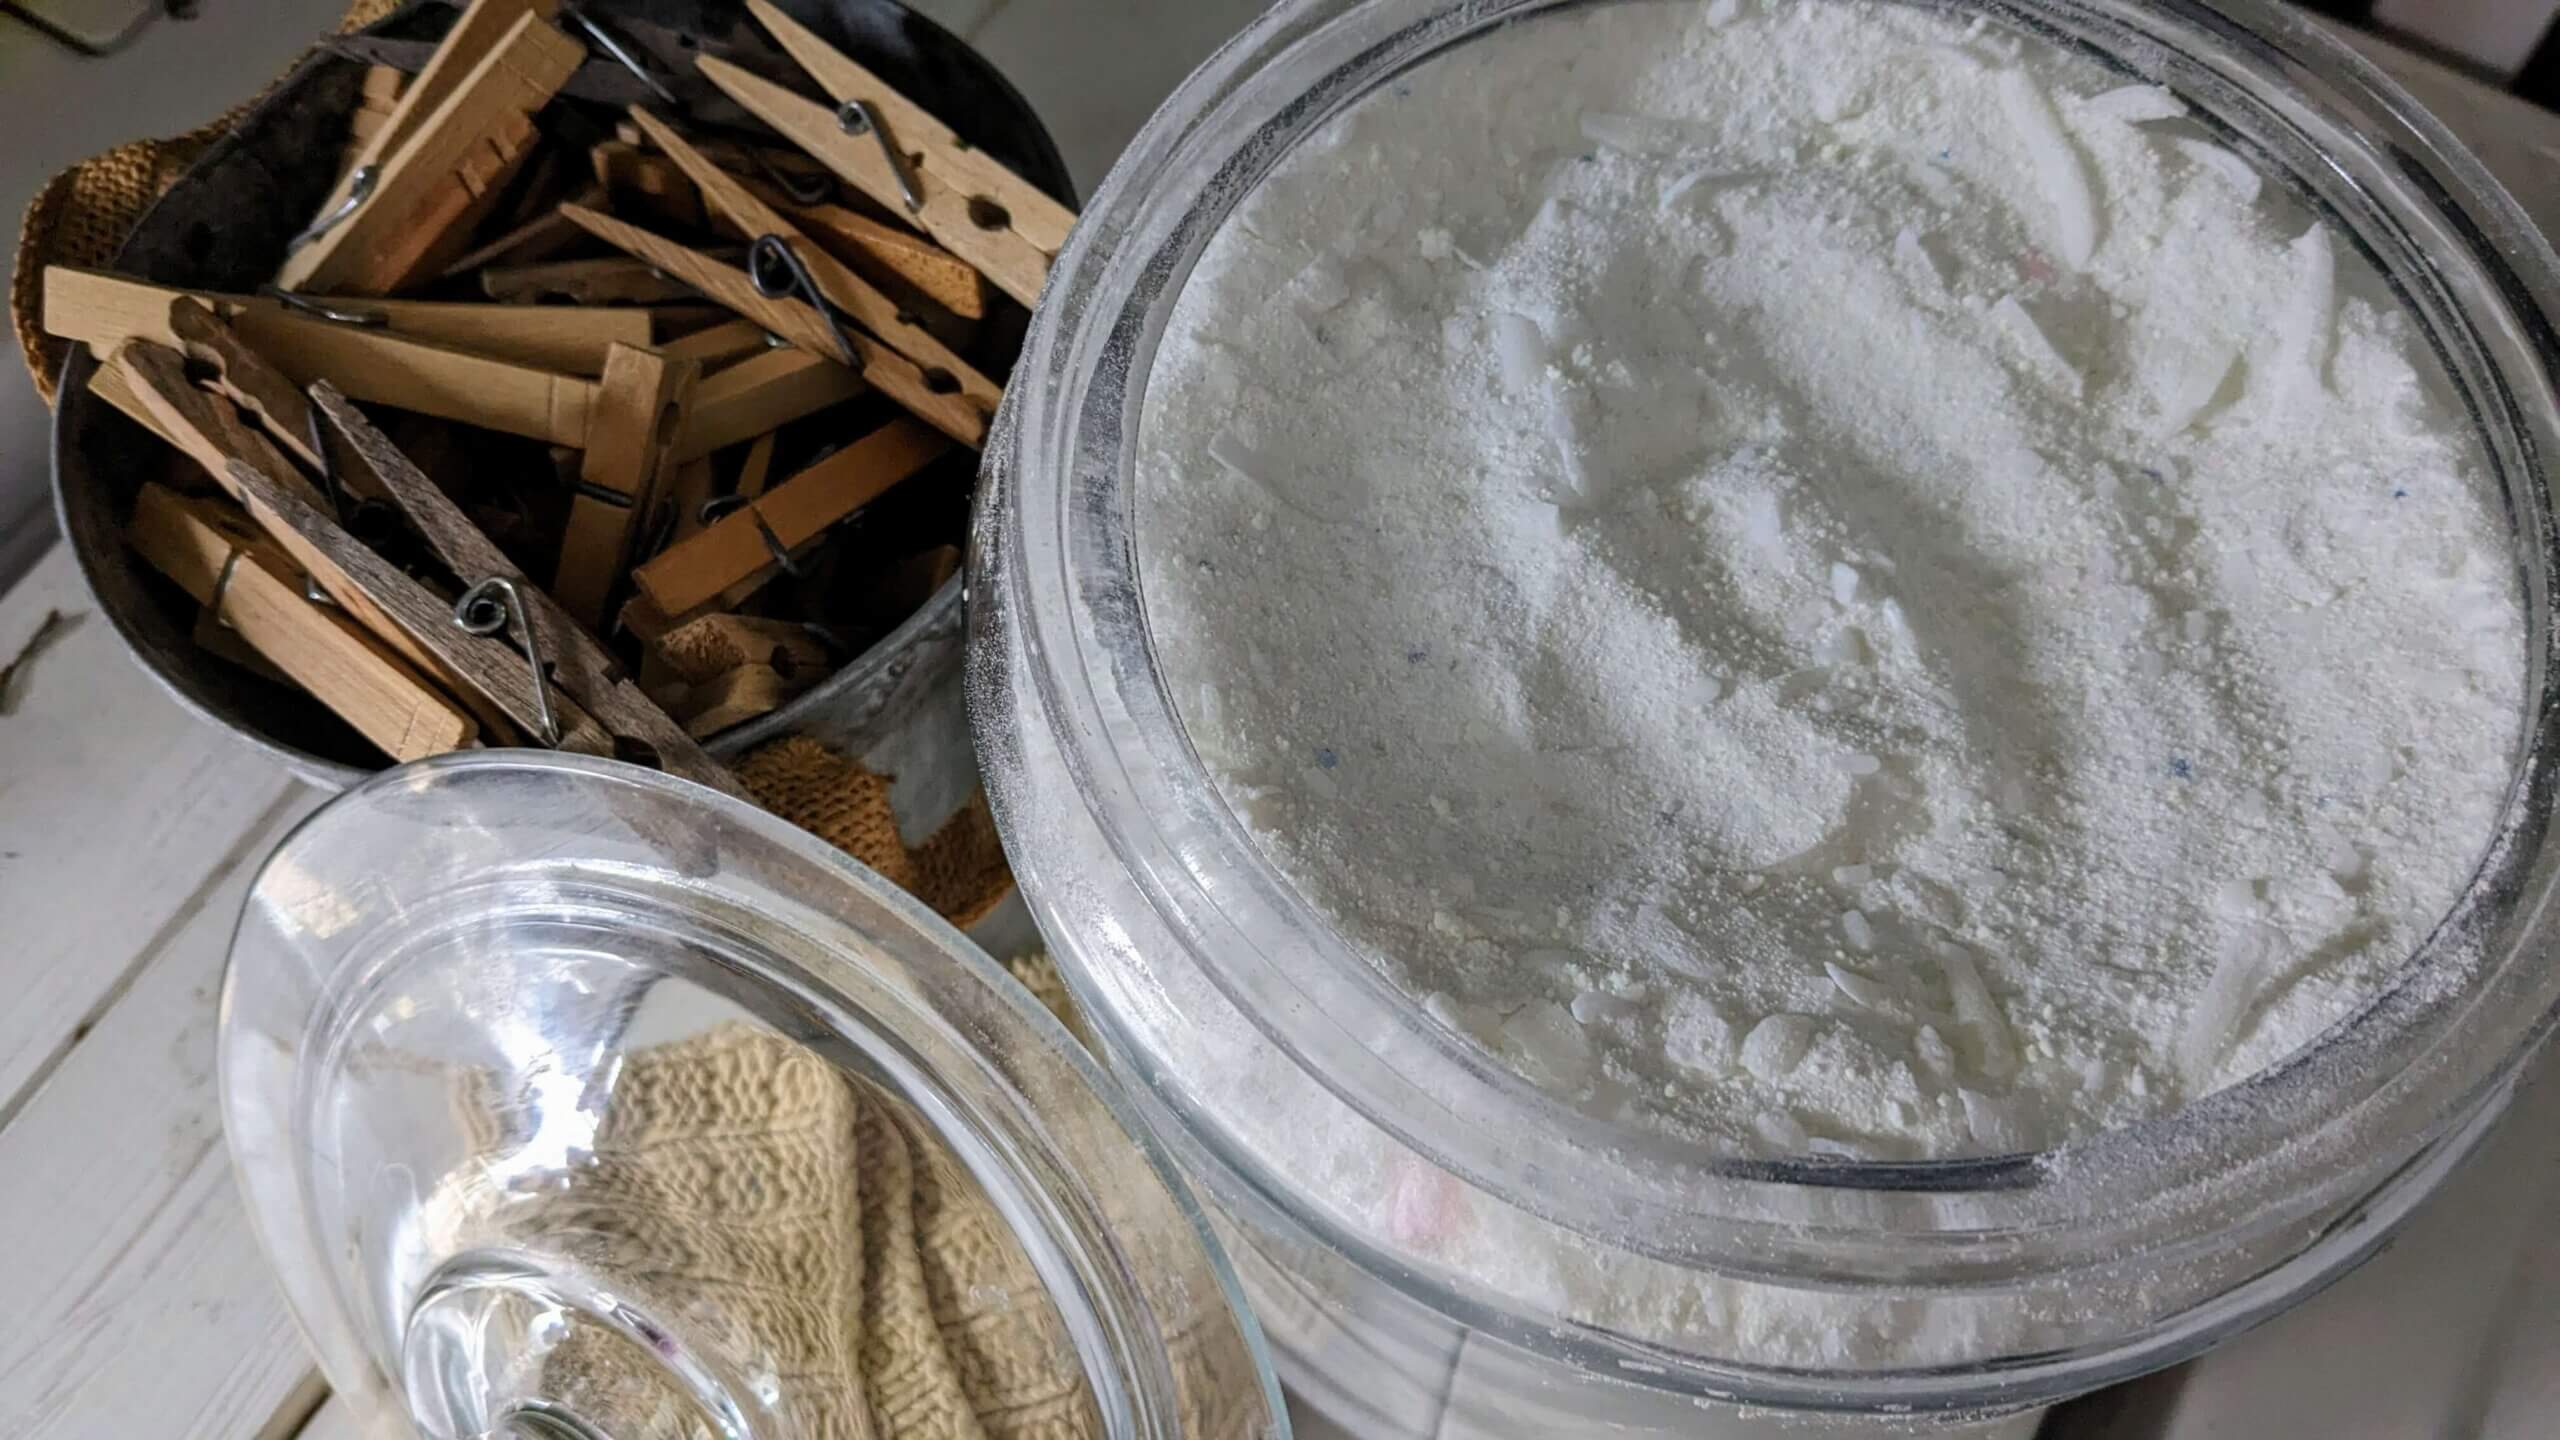 a bucket of clothespins next to a glass lid next to a jar of powdered laundry detergent